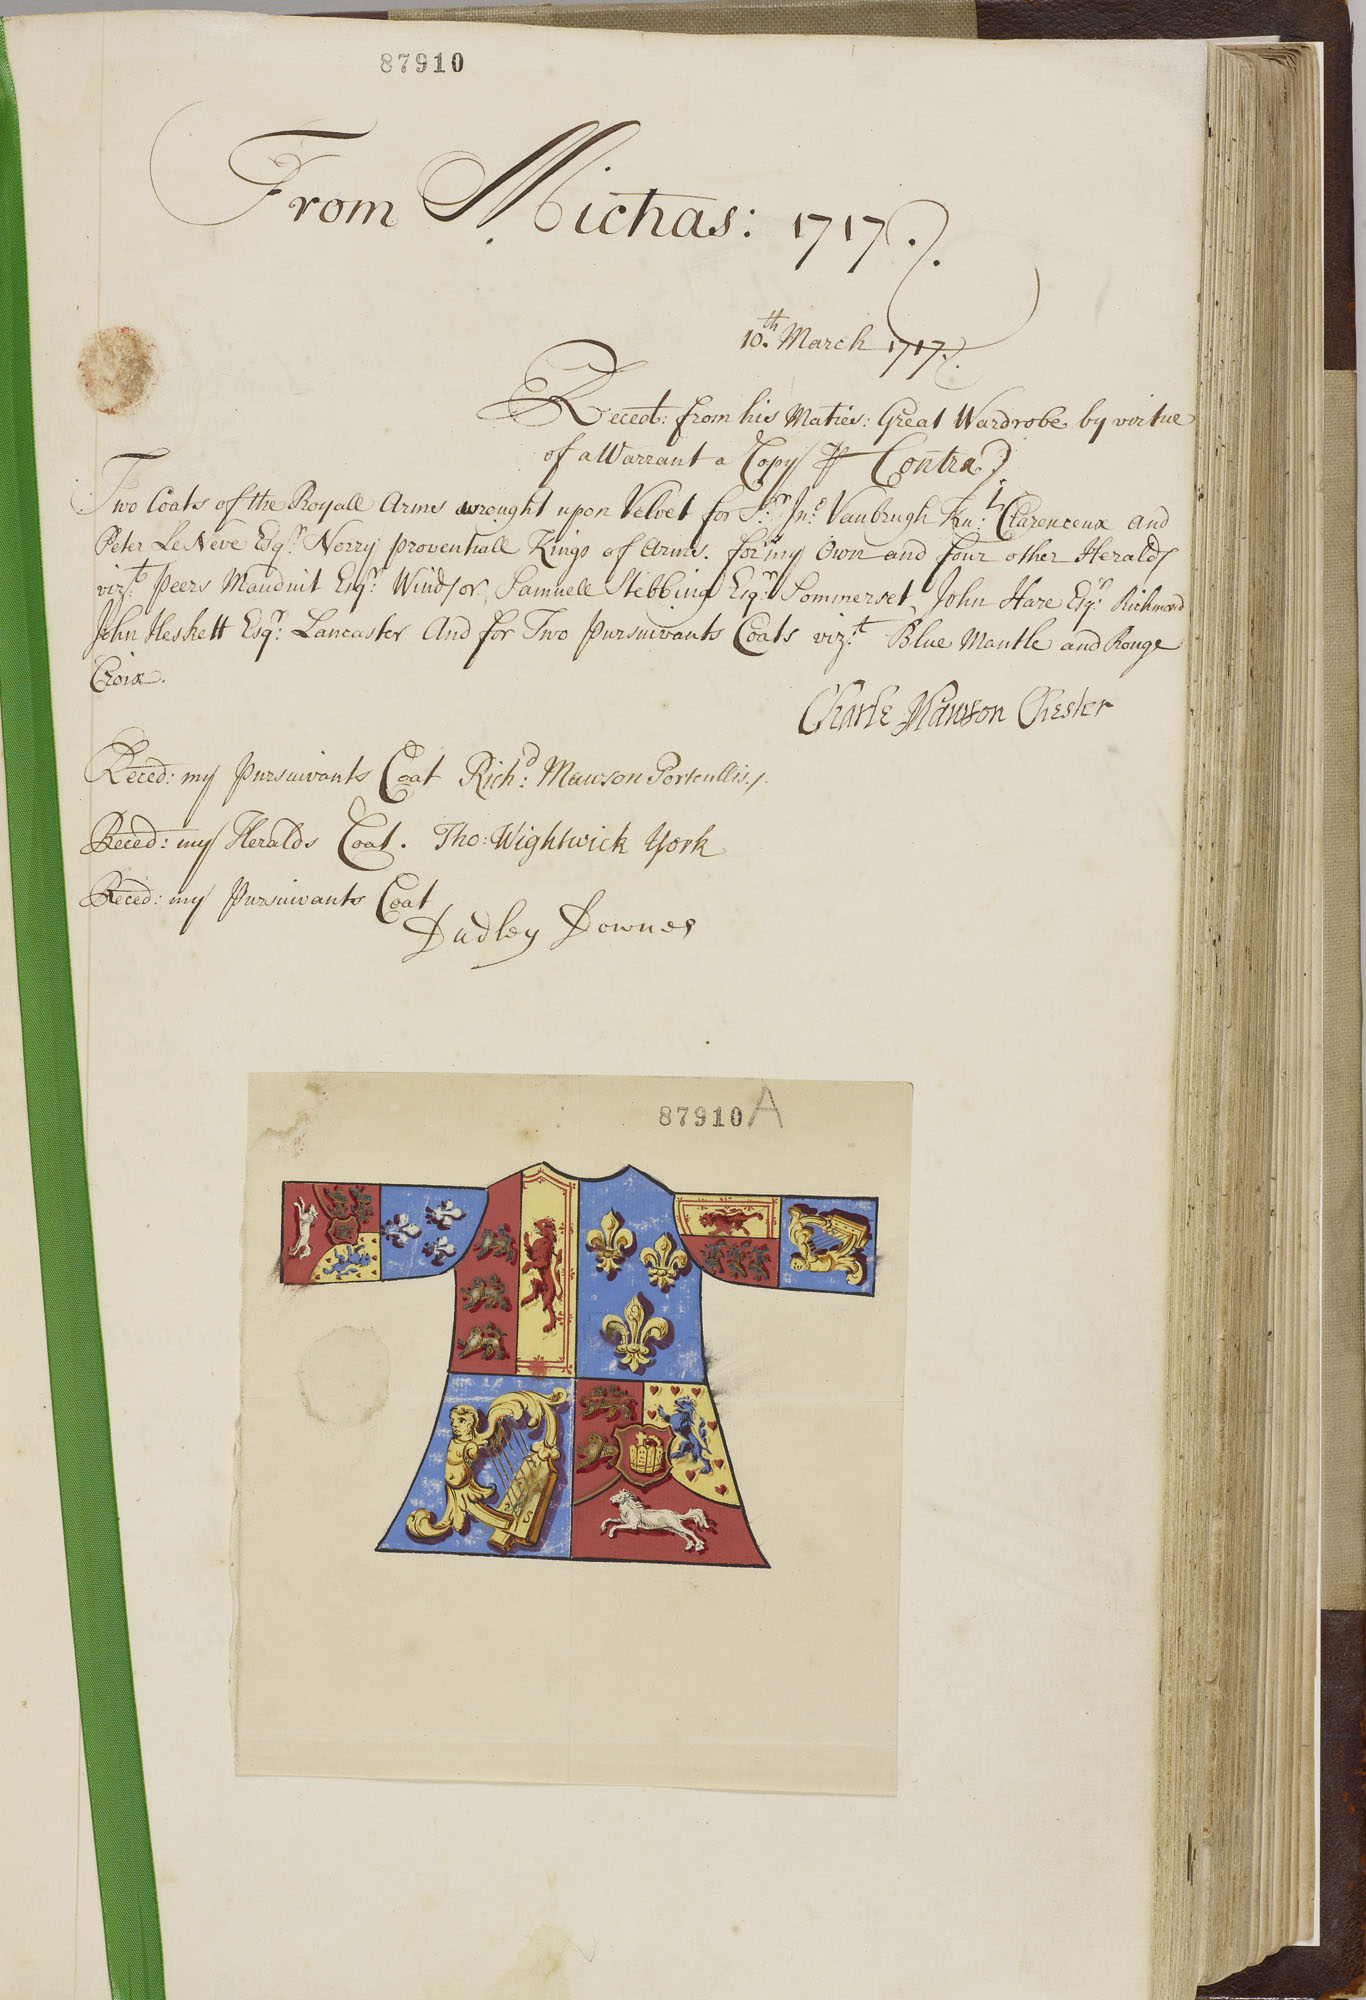 Page 19, copy receipt for tabards for officers in the College of Arms, with coloured drawing of the tabard, bearing the Royal Arms, March 1717